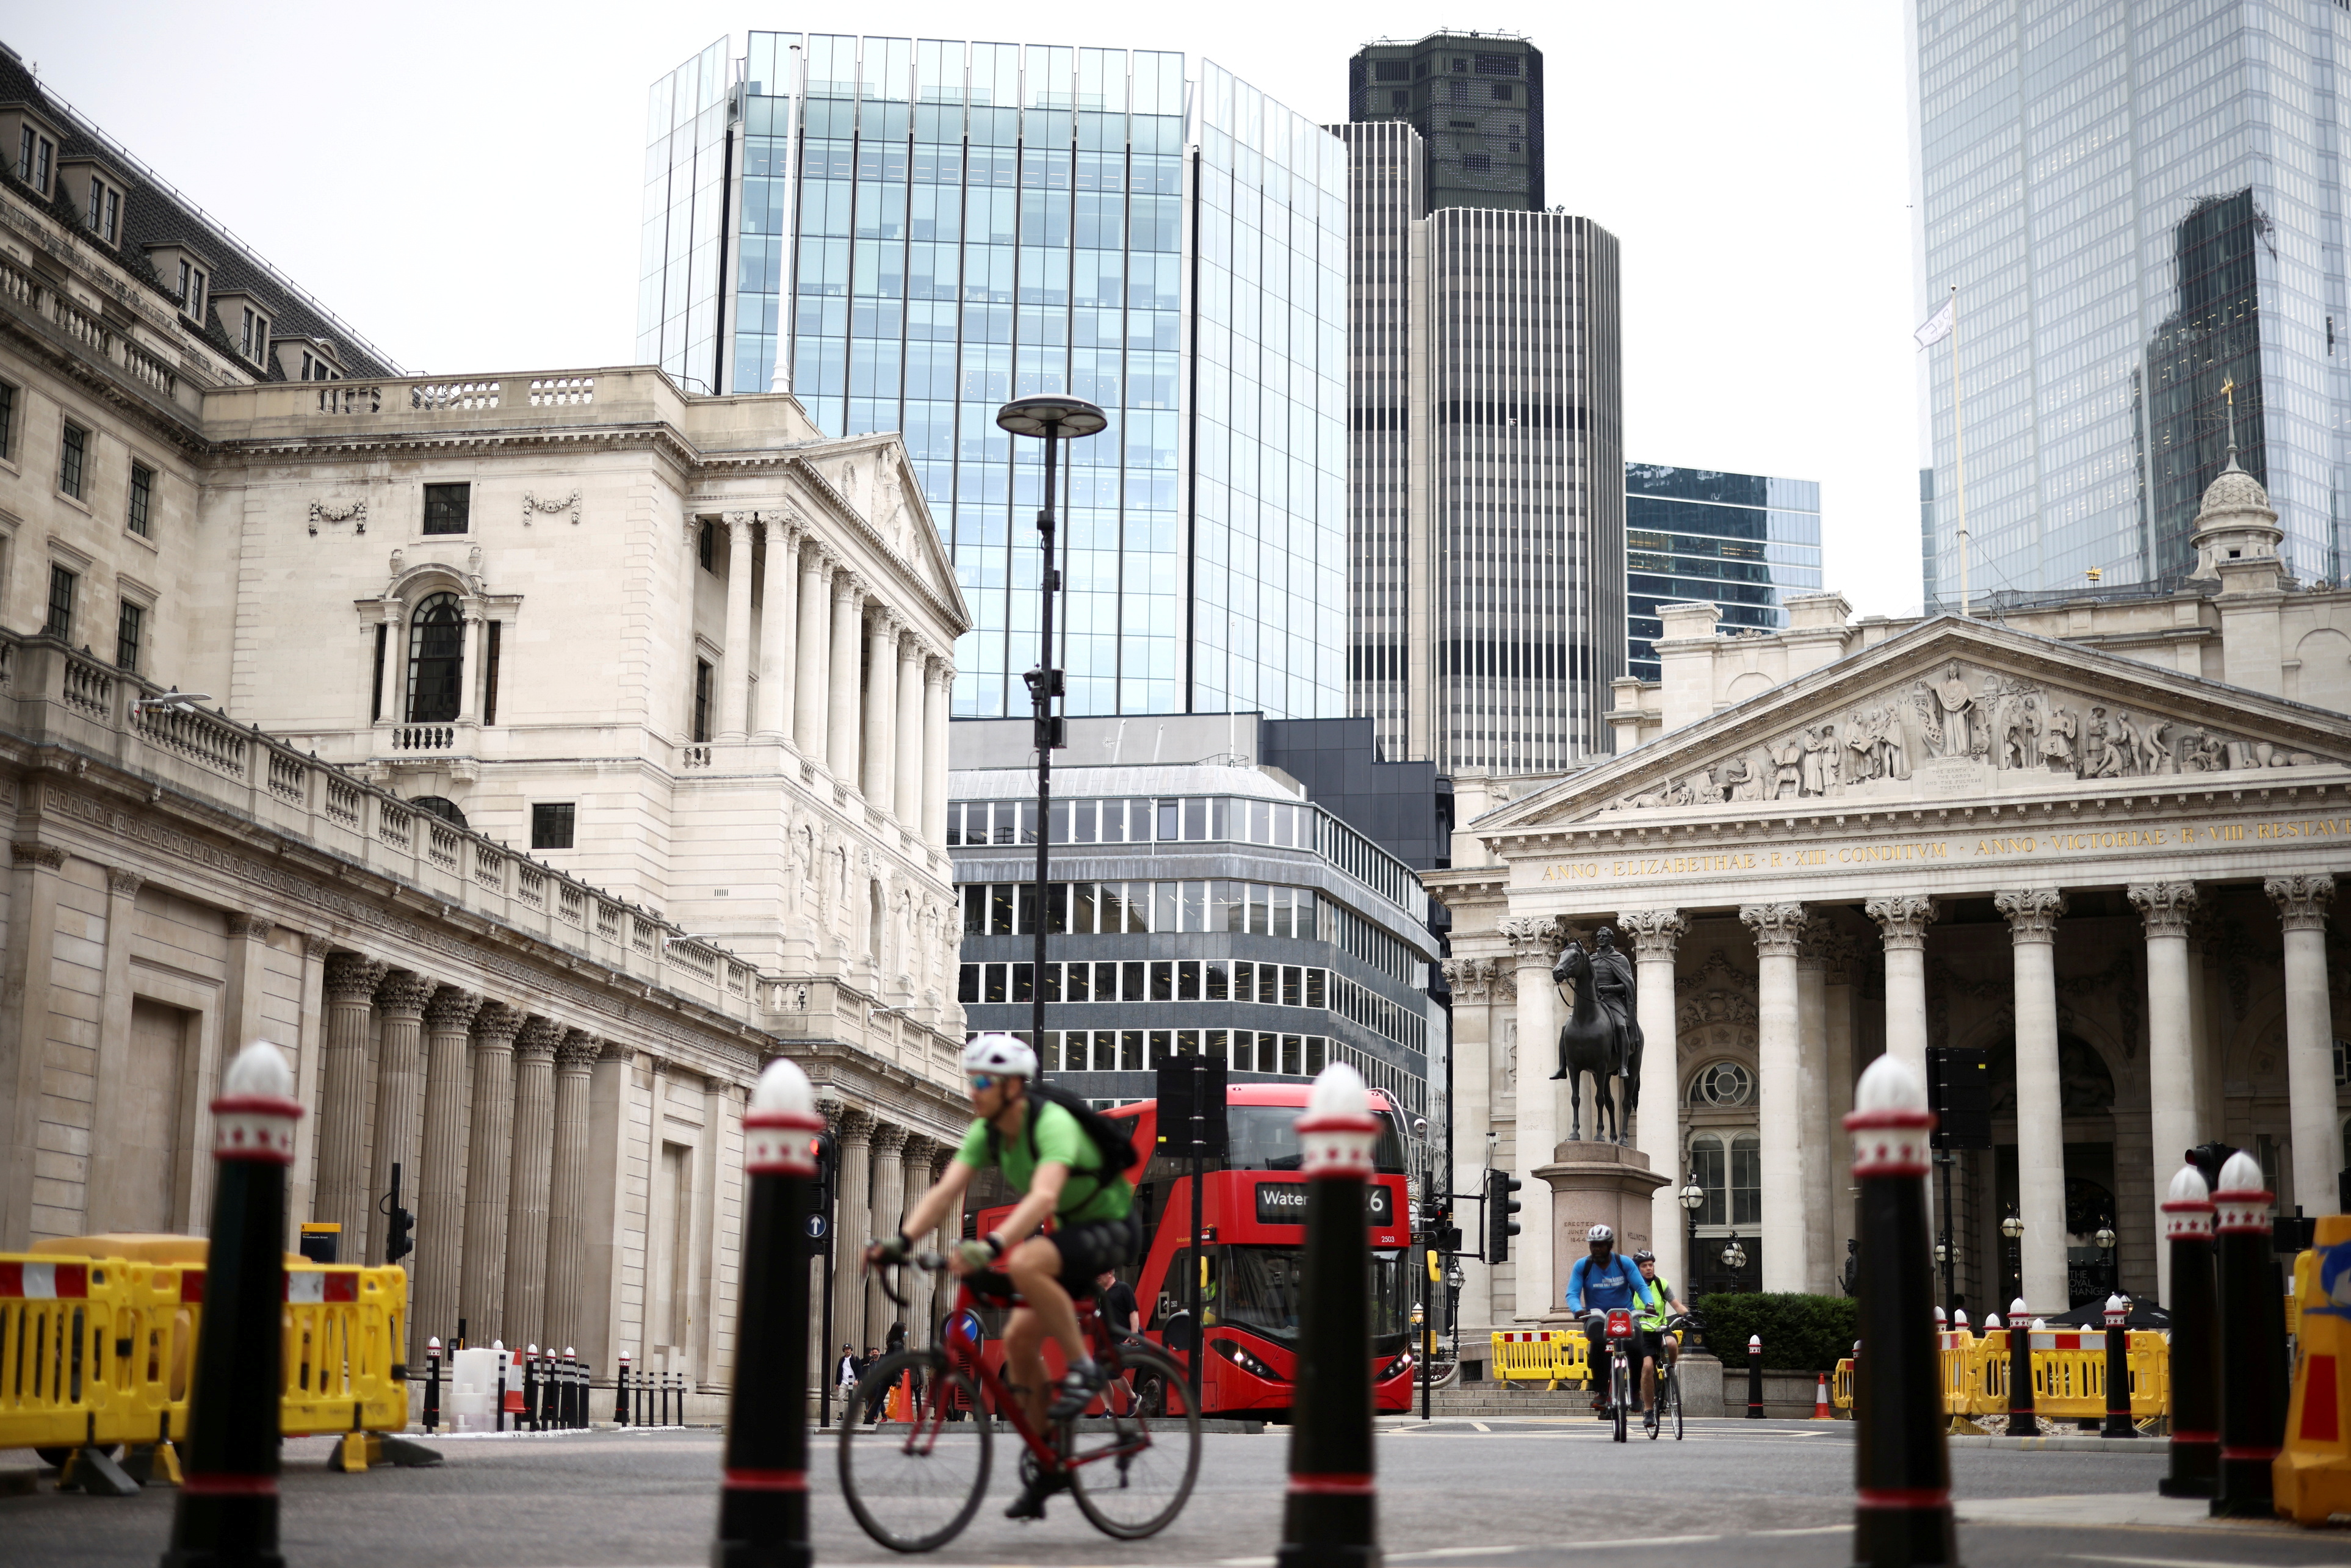 The Bank of England can be seen as people cycle through the City of London financial district